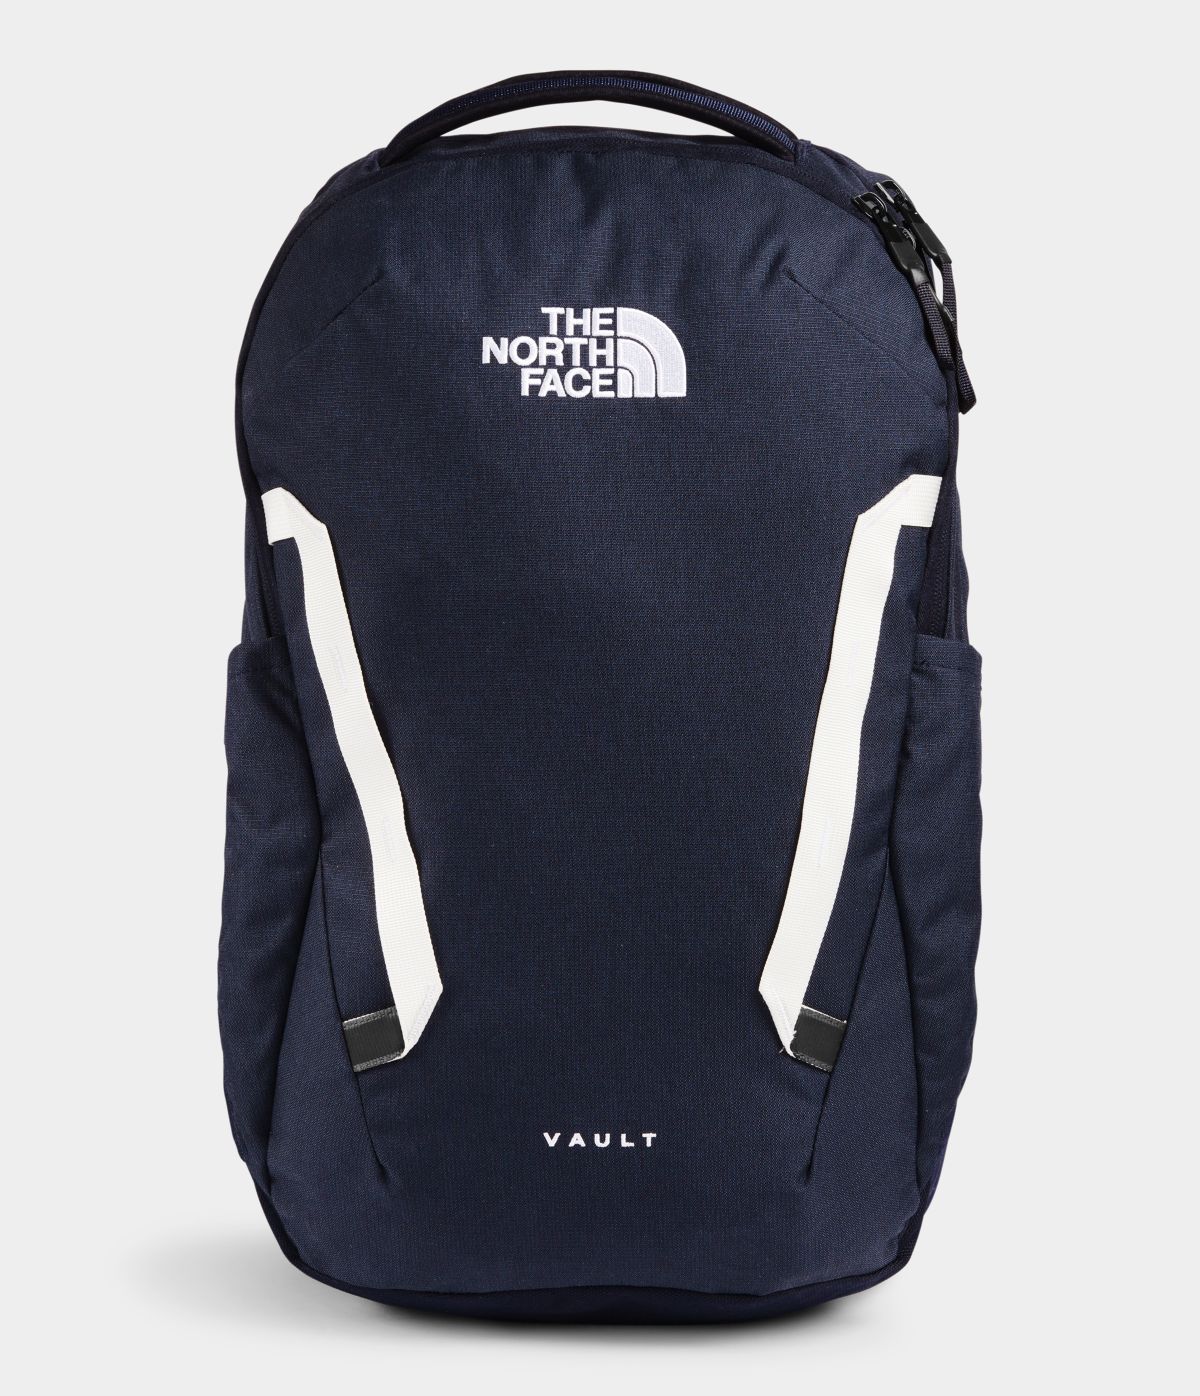 Unisex The North Face Vault Backpack in Aviator Navy Light Heather/TNF White from front view